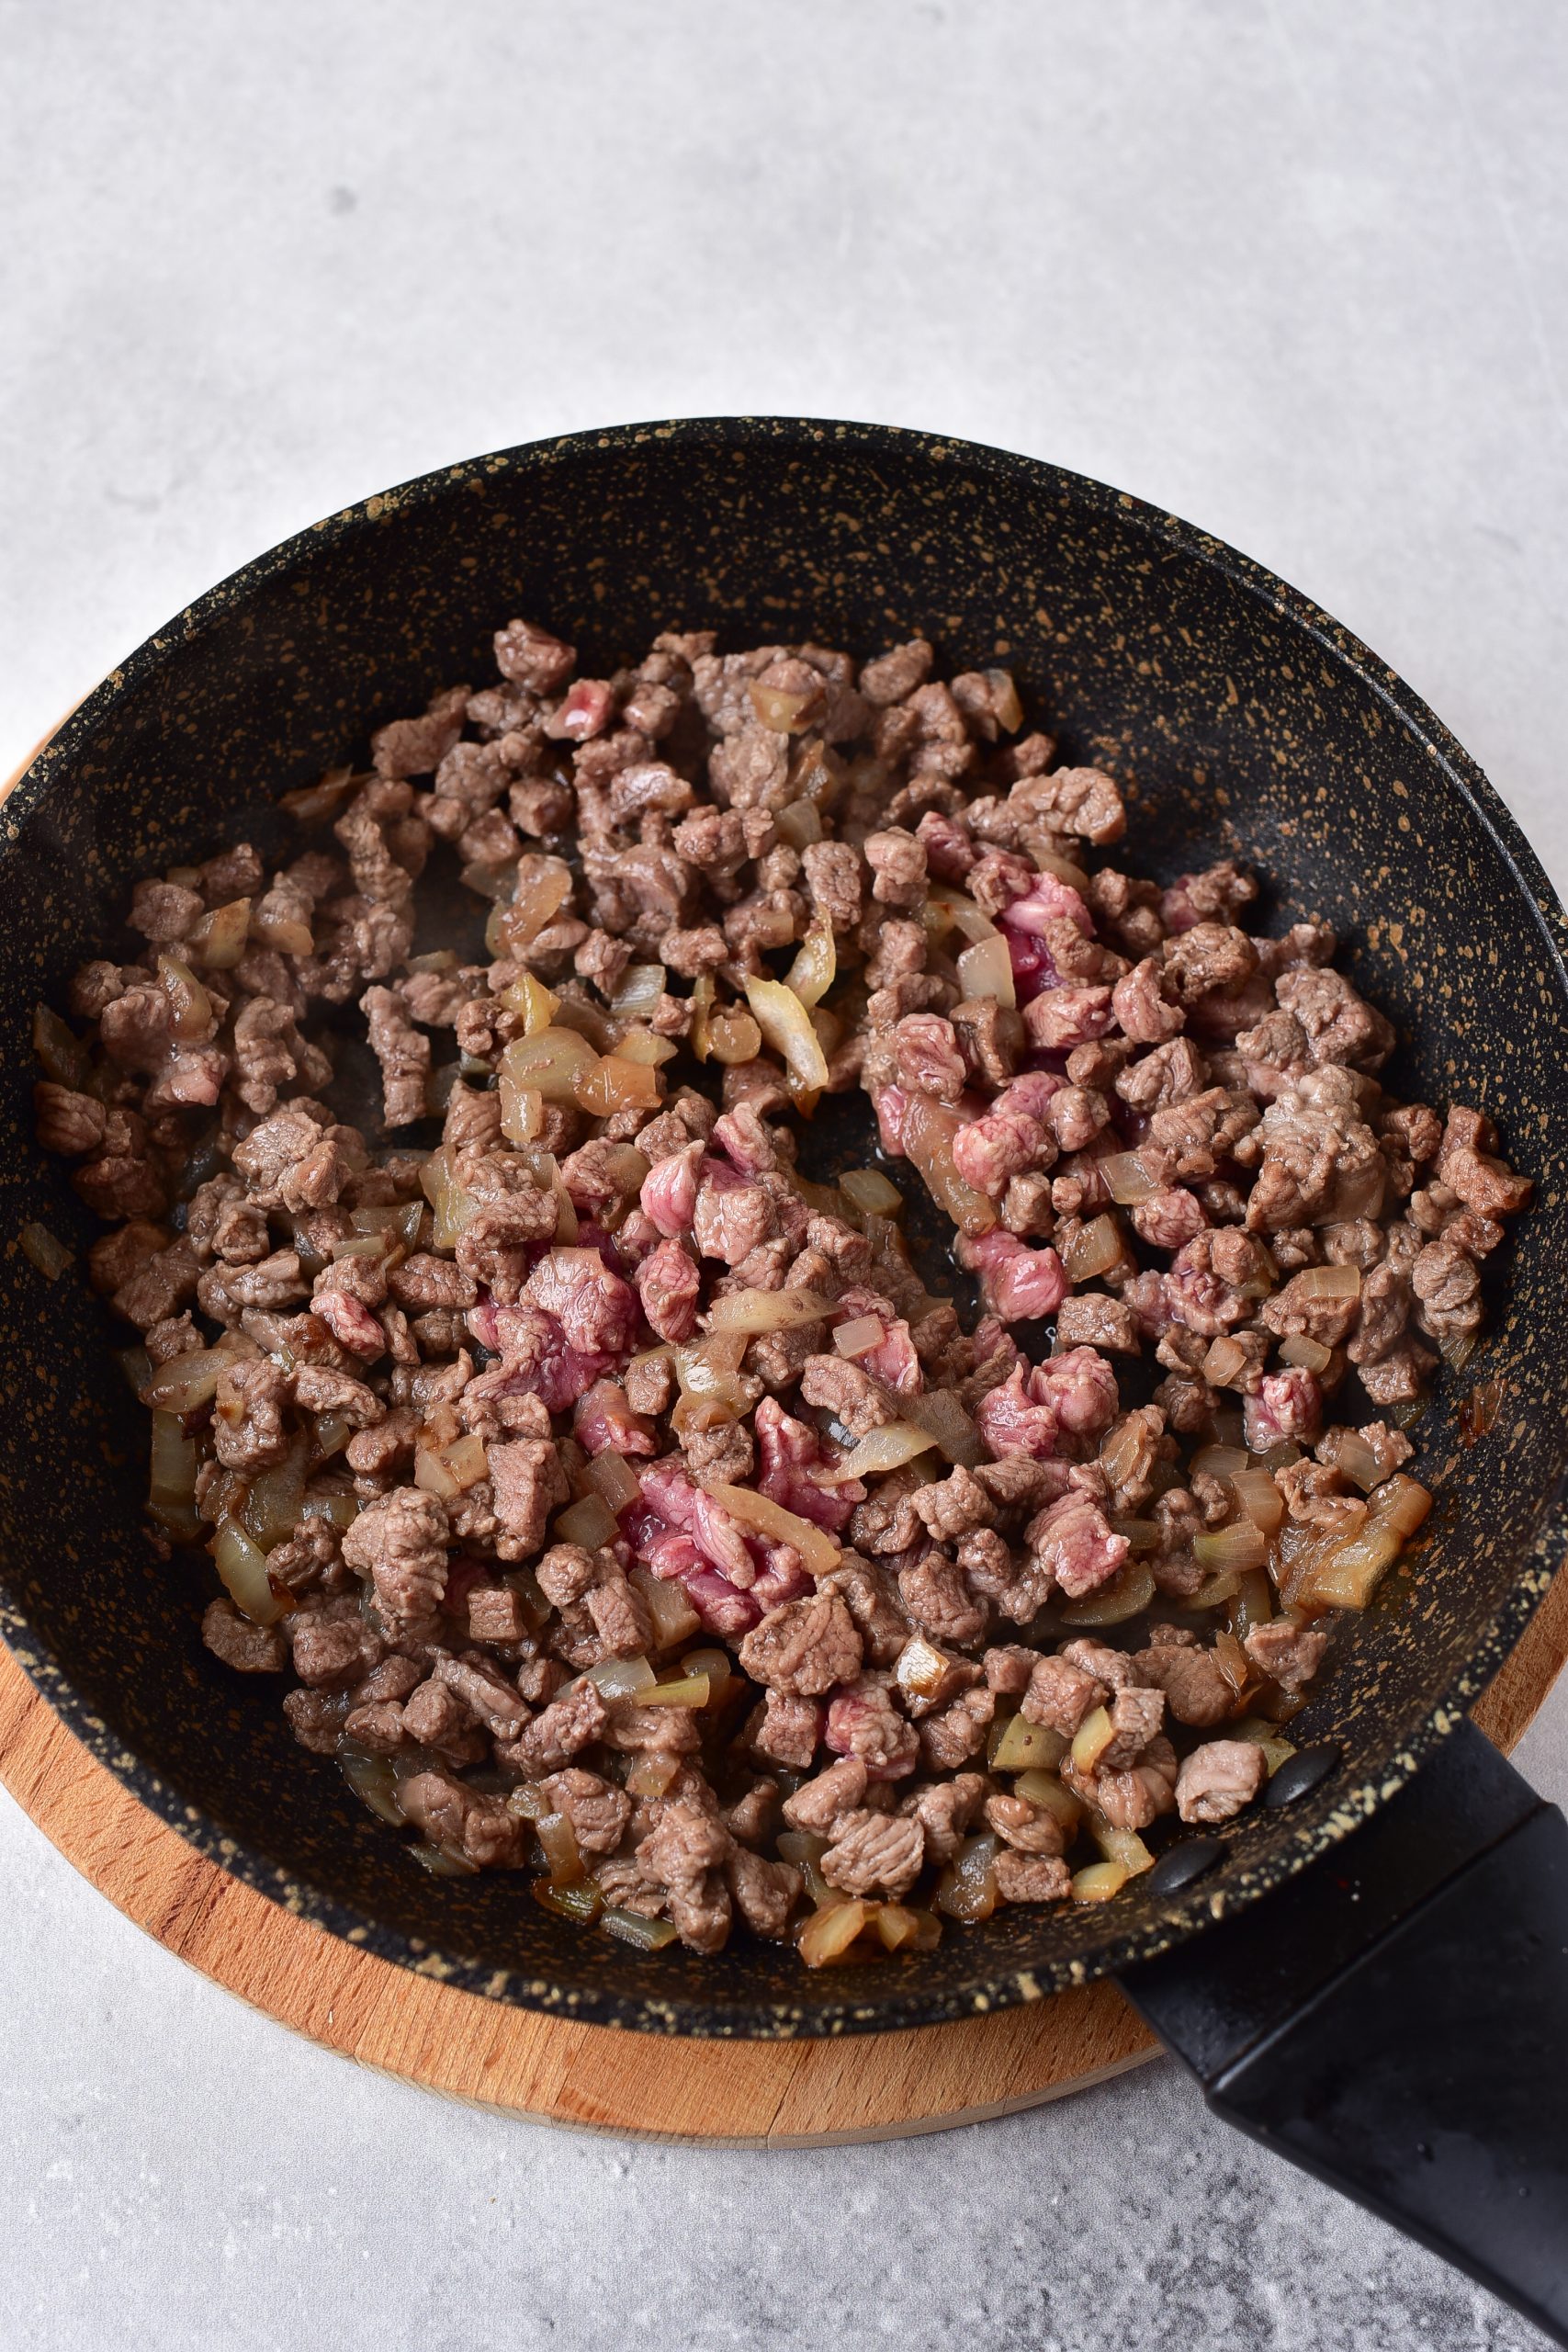 Stir in the ground beef, and saute until completely browned. Drain the excess far.